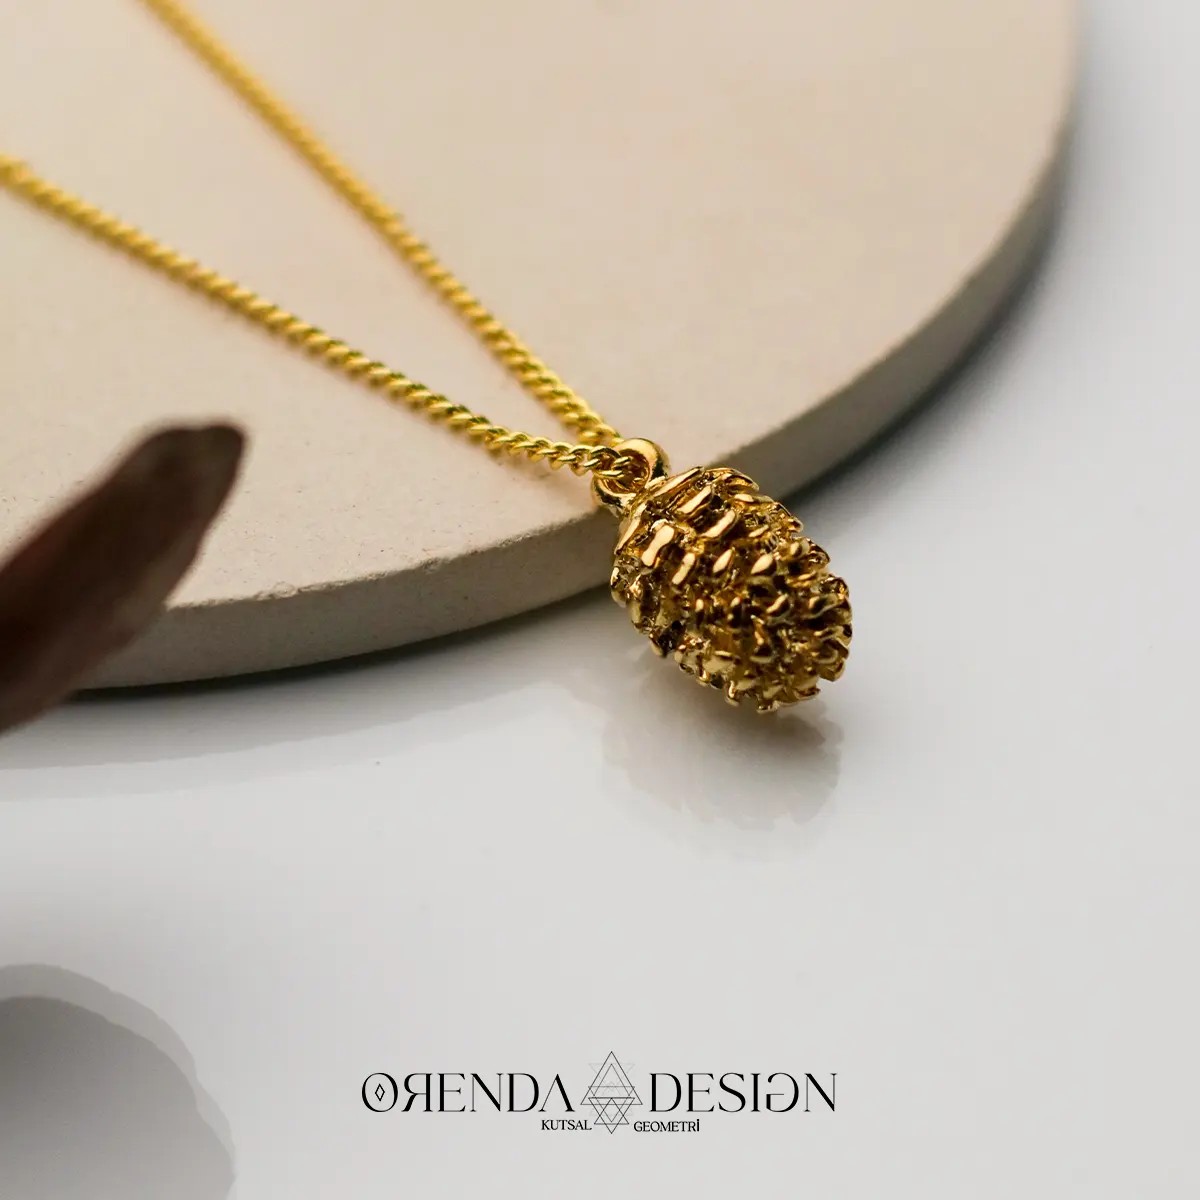 Cone (epiphysis) necklace - Gold